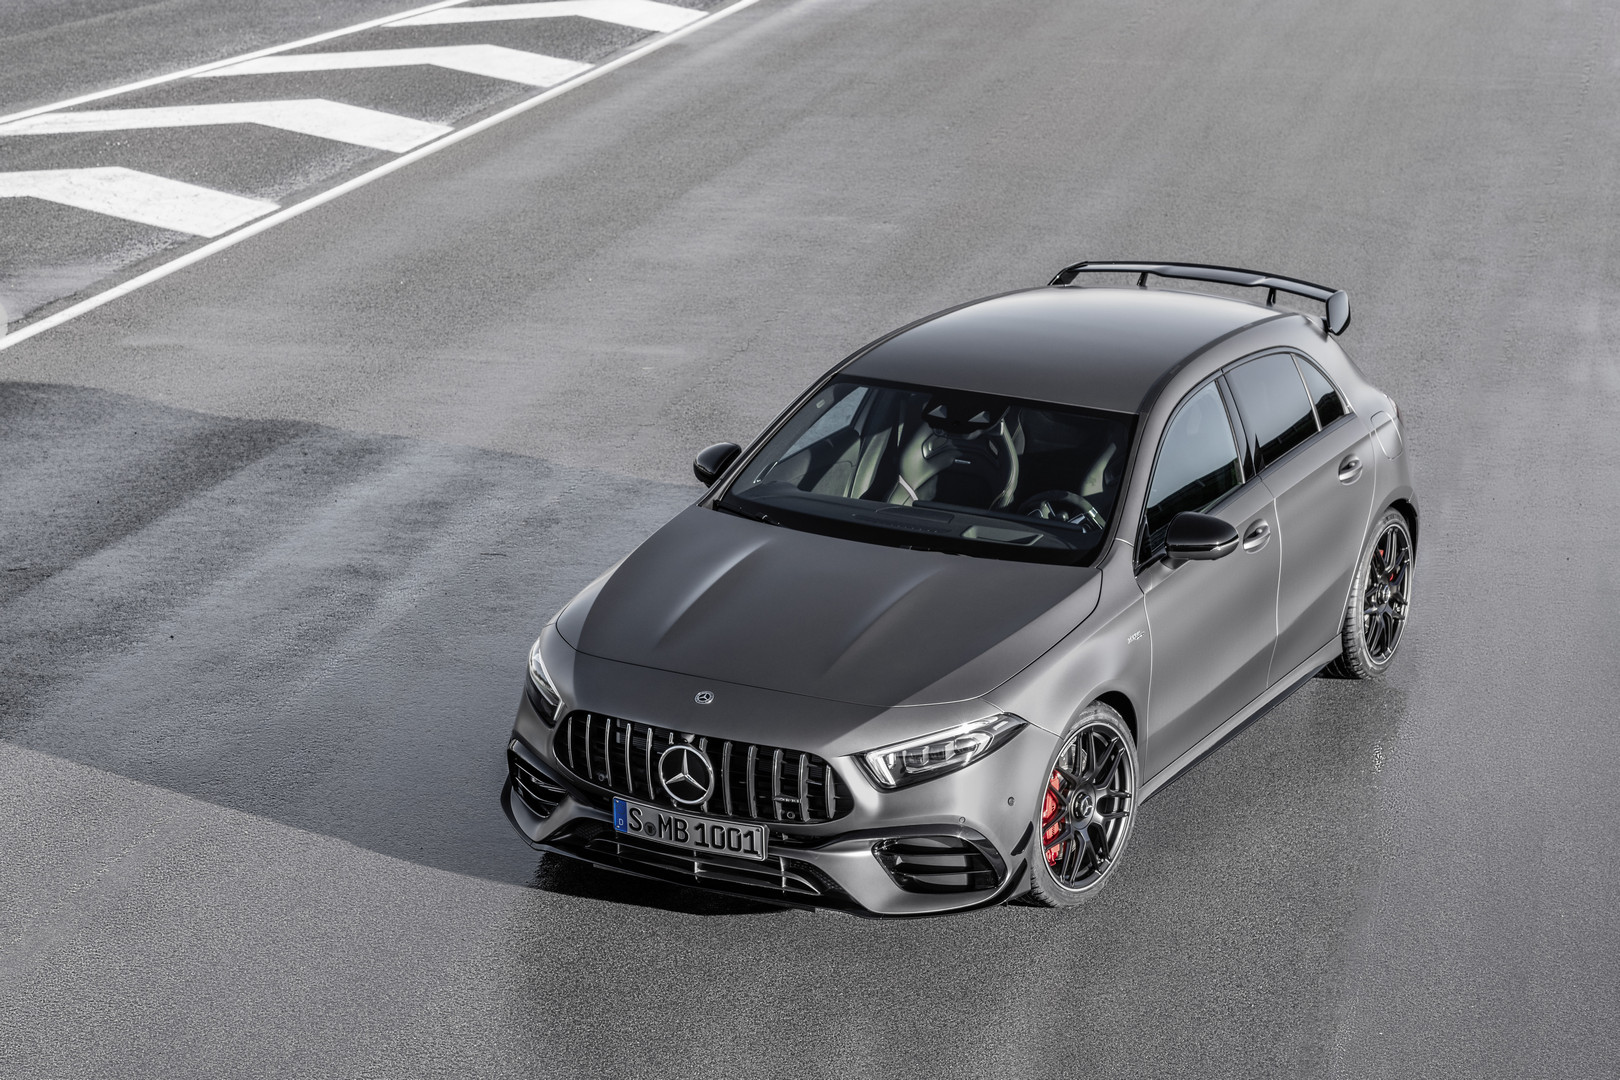 A45 S AMG Most Powerful Hot Hatch